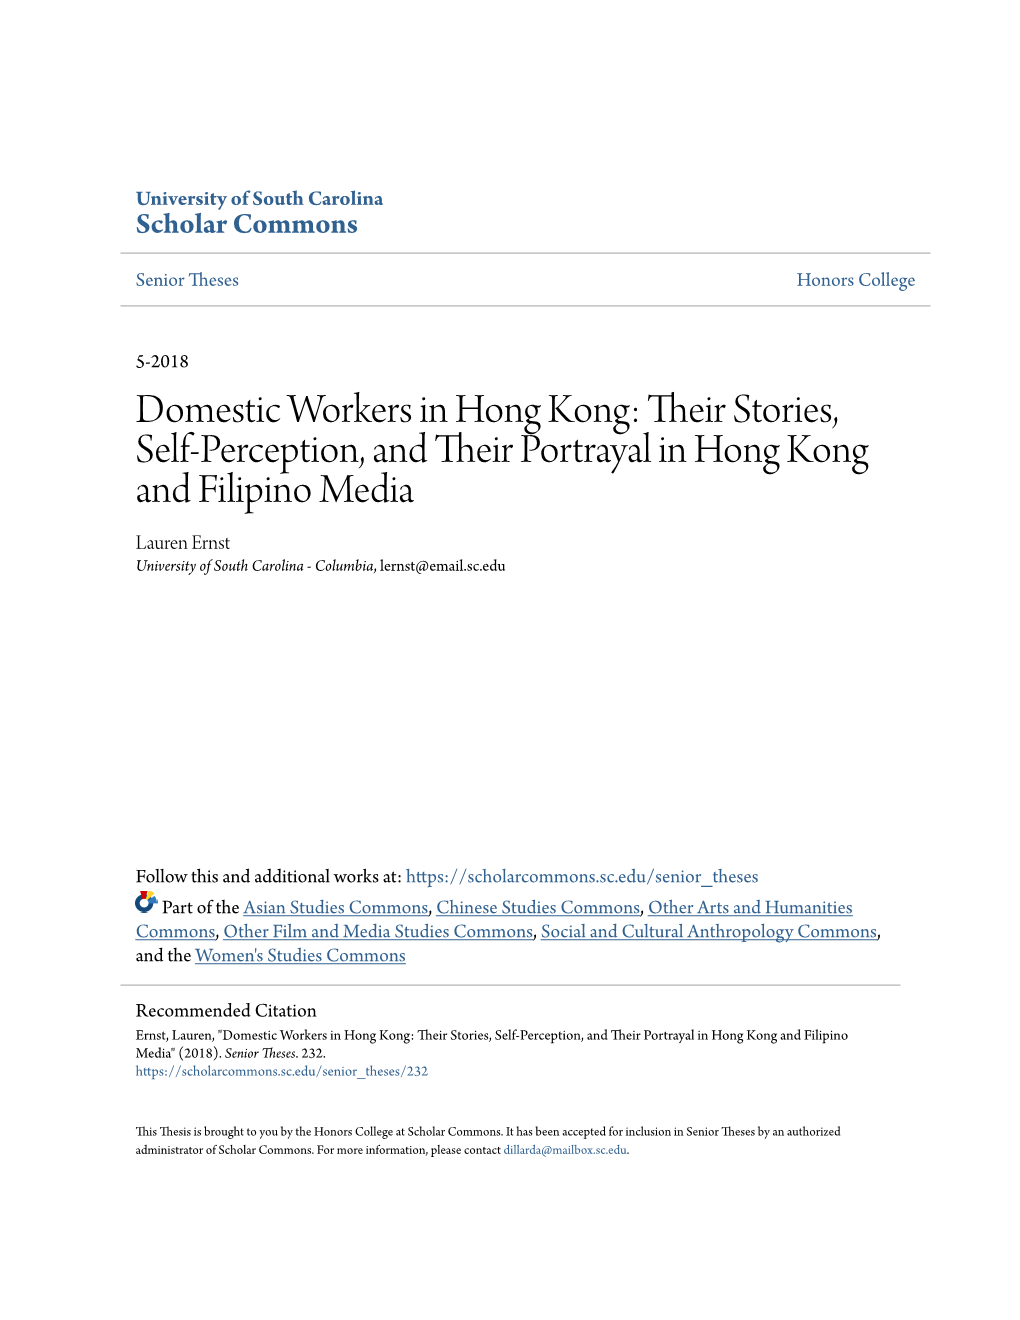 Domestic Workers in Hong Kong